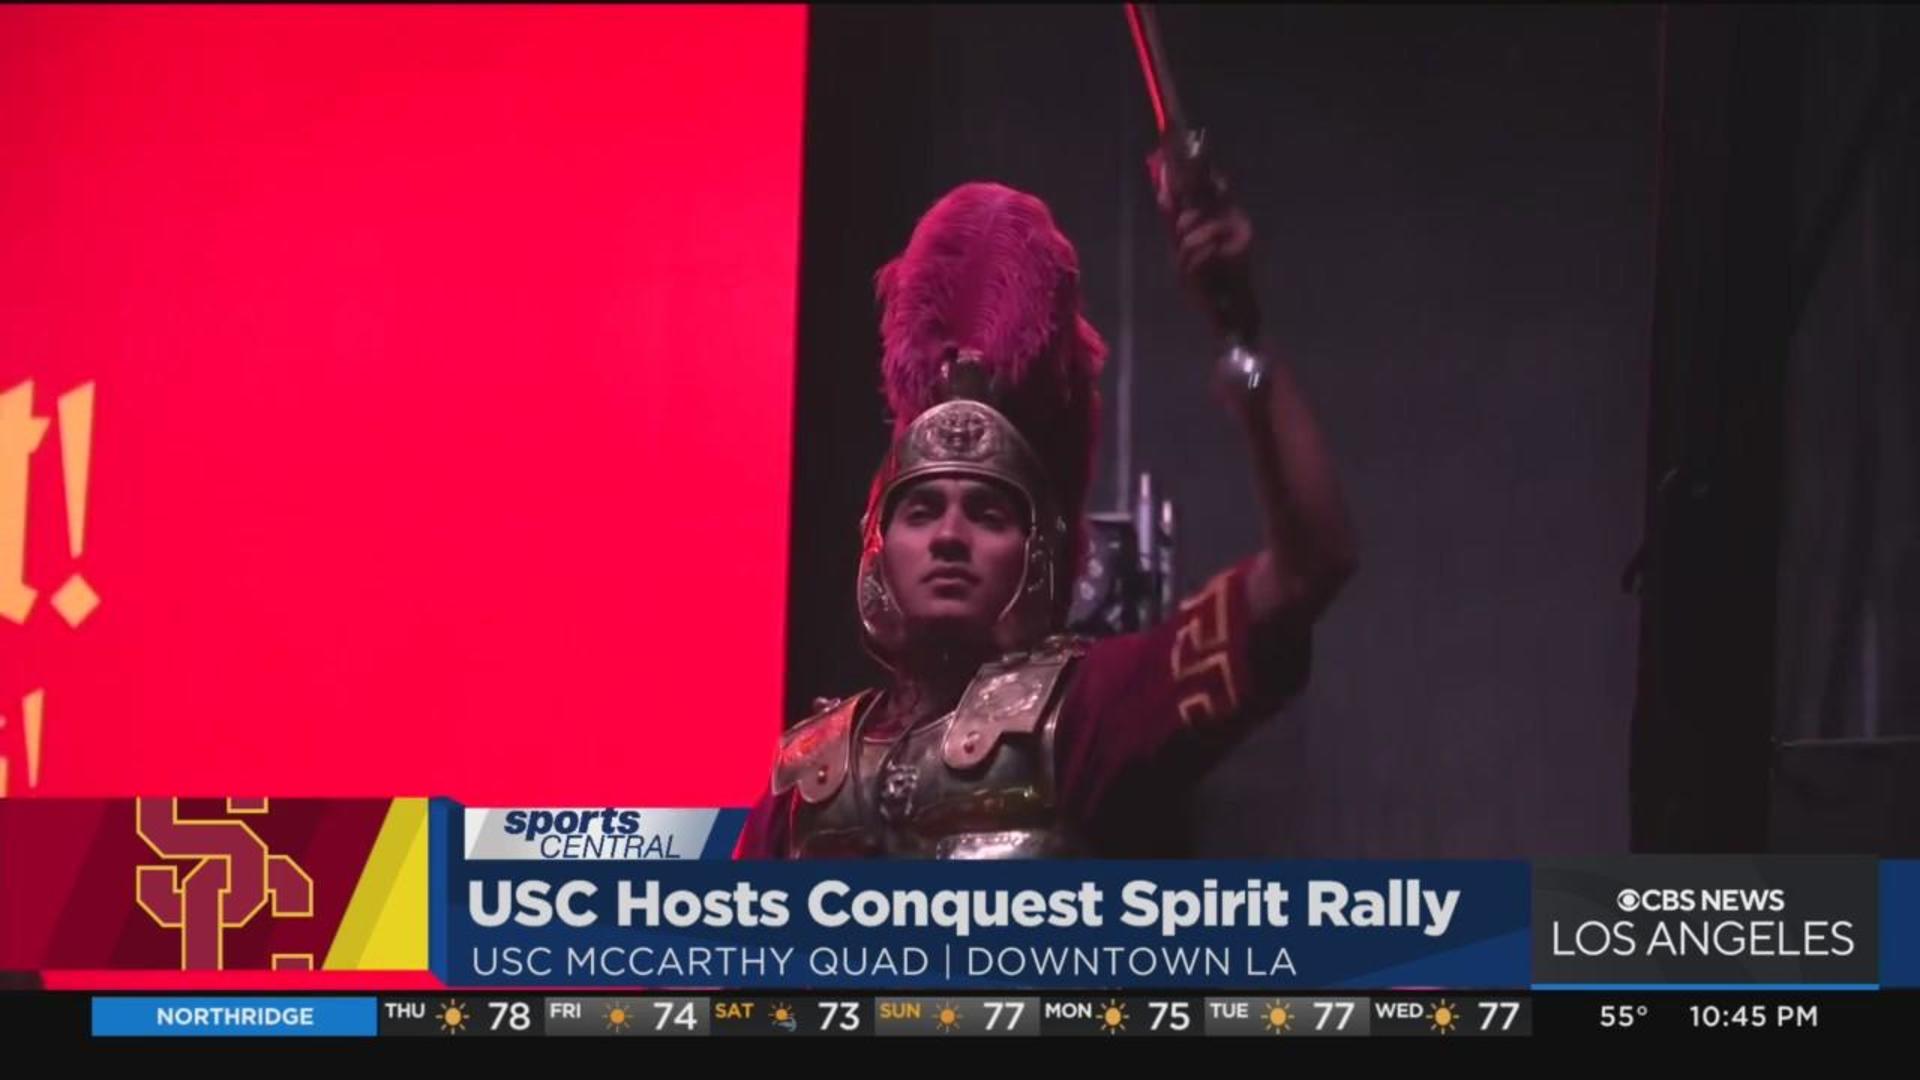 USC hosts conquest spirit rally ahead of Crosstown Rivalry game vs